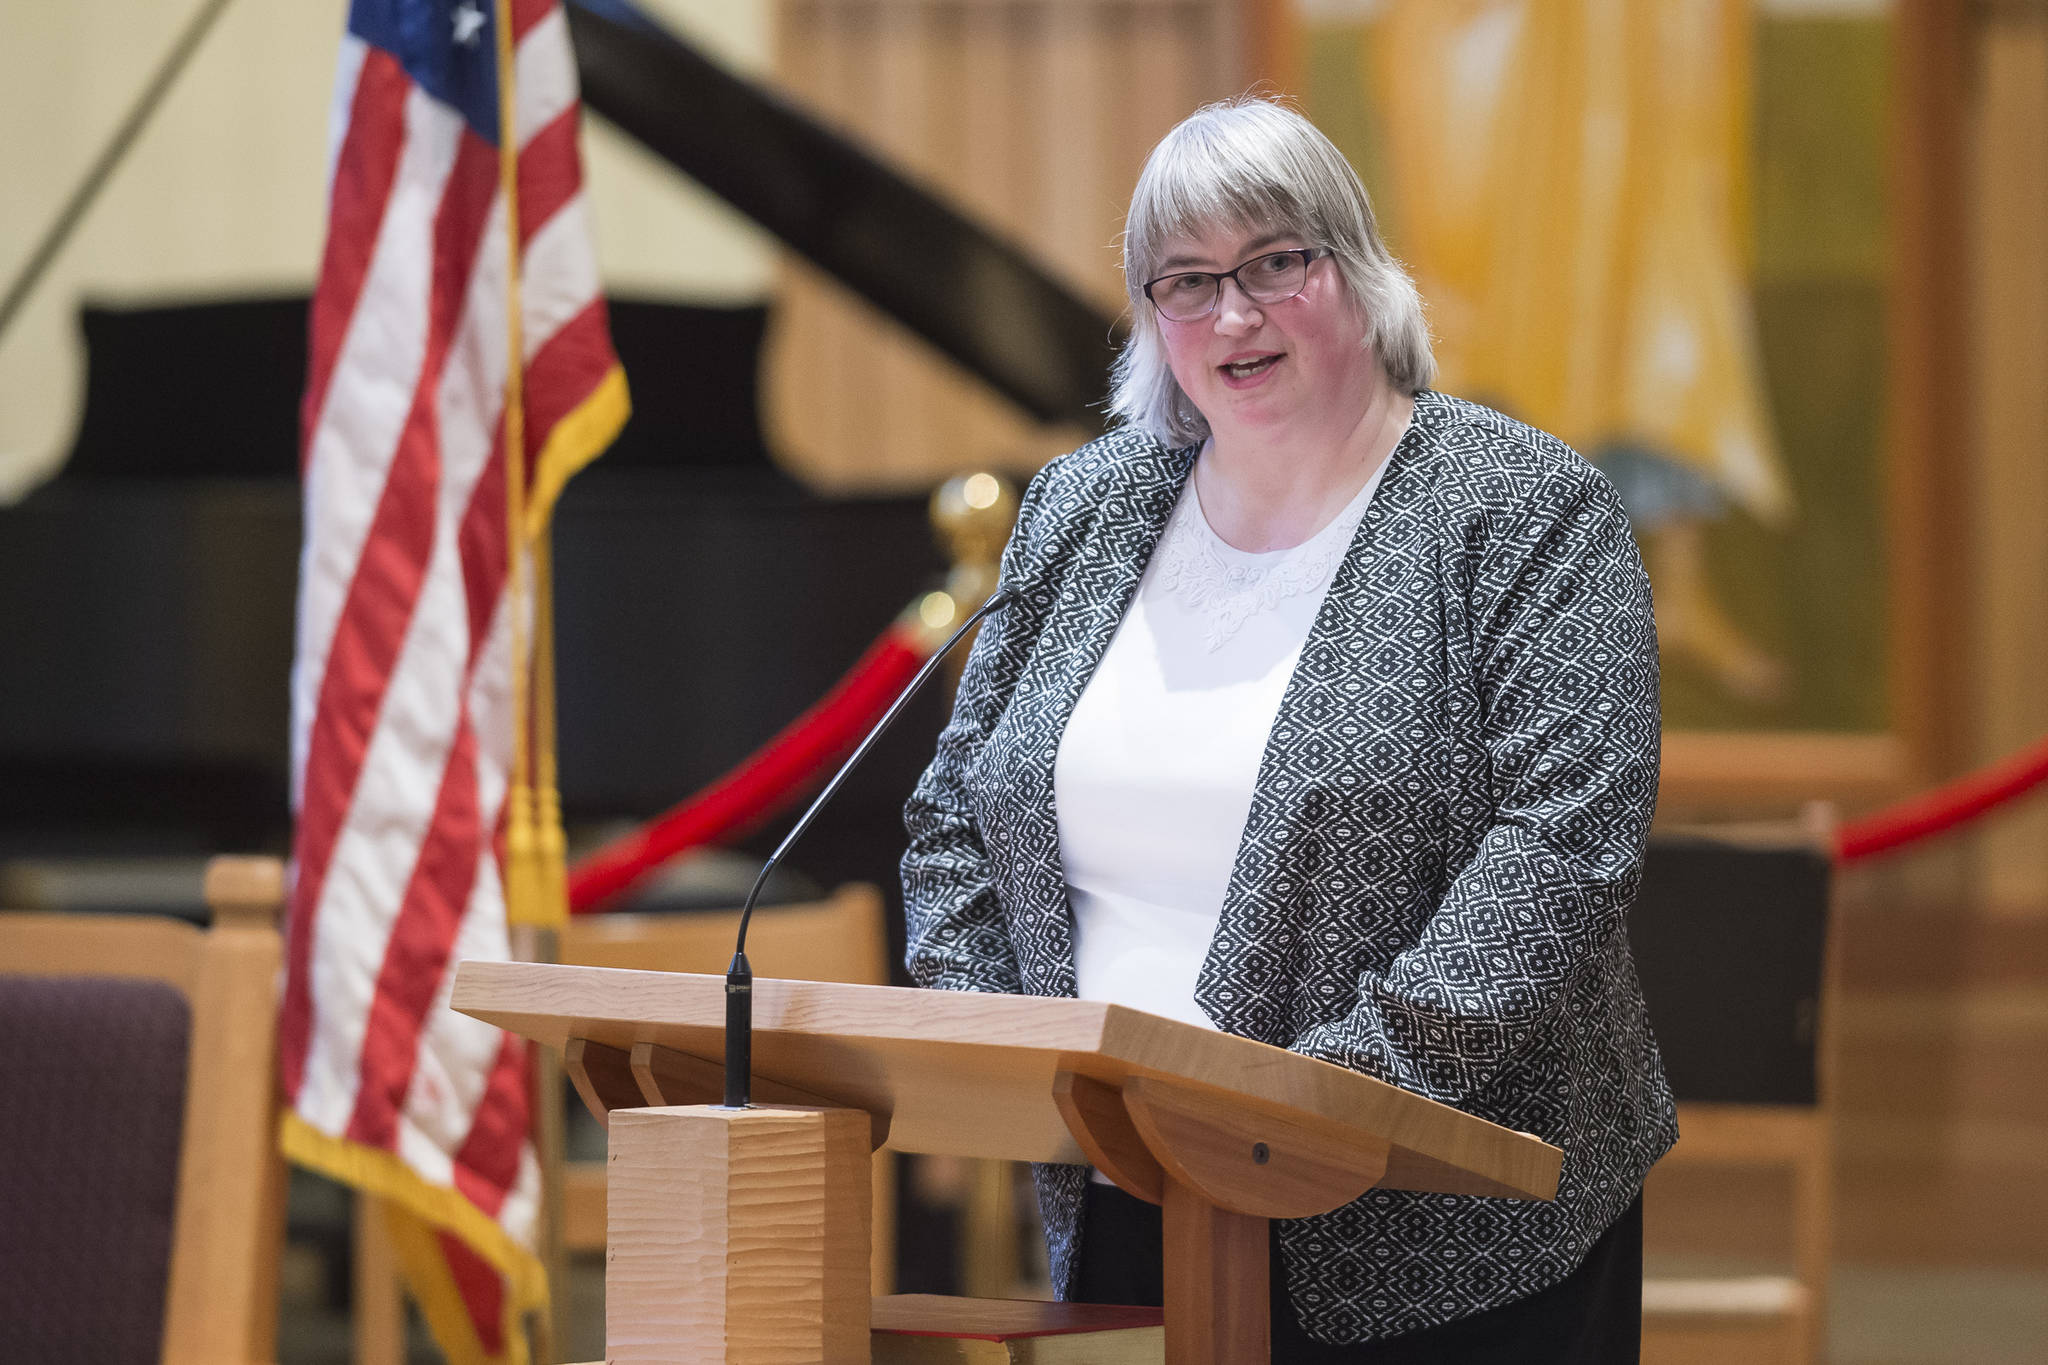 Mayor Beth Weldon speaks at the Dr. Martin Luther King Jr. 2019 Community Celebration at St. Paul's Catholic Church on Monday, Jan. 21, 2019. On Friday, she announced that she is running for another term as mayor. (Michael Penn /Juneau Empire File)